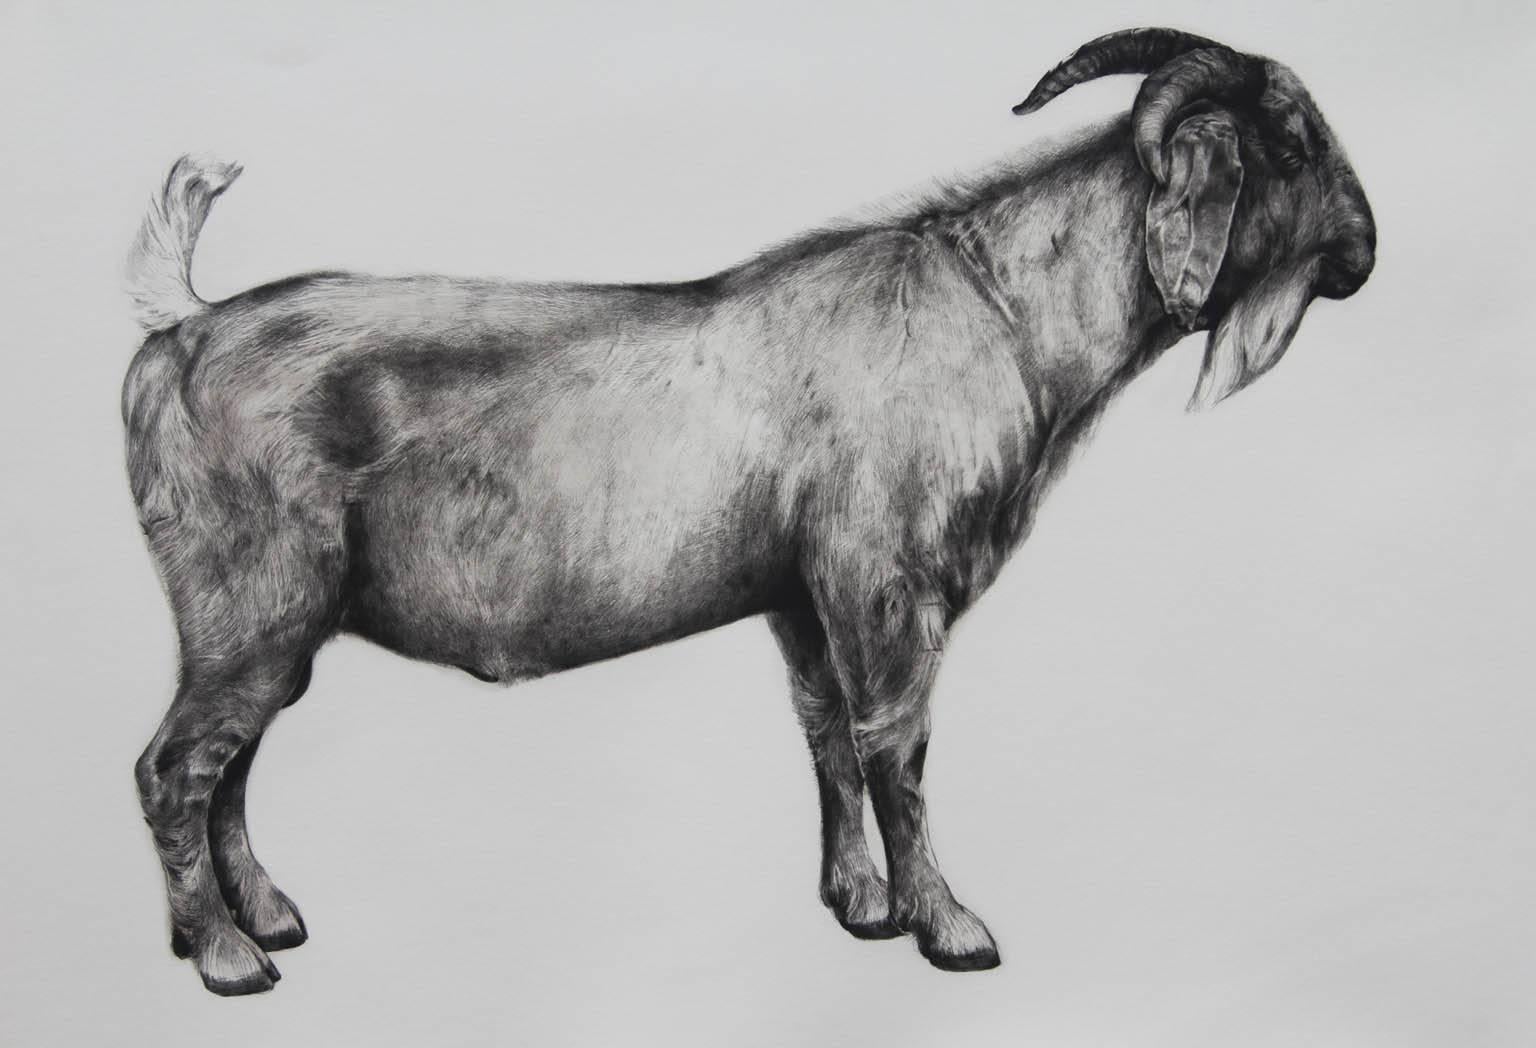 Tammy Mackay Print - The Bearded One, black and white goat print, Animal Art, Limited edition print